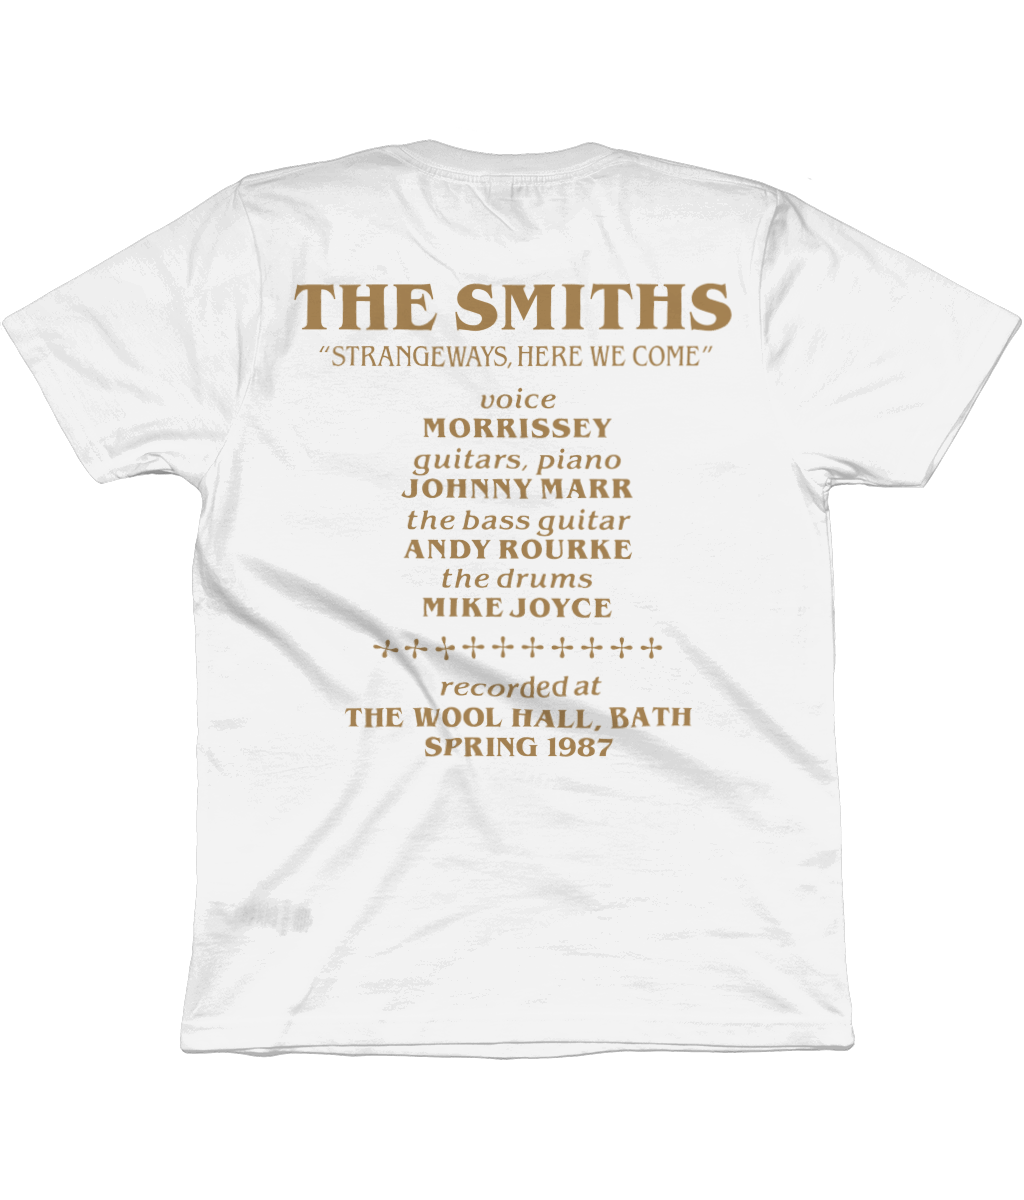 THE SMITHS - STRANGEWAYS, HERE WE COME - 2012 Promo - Pink & Brown